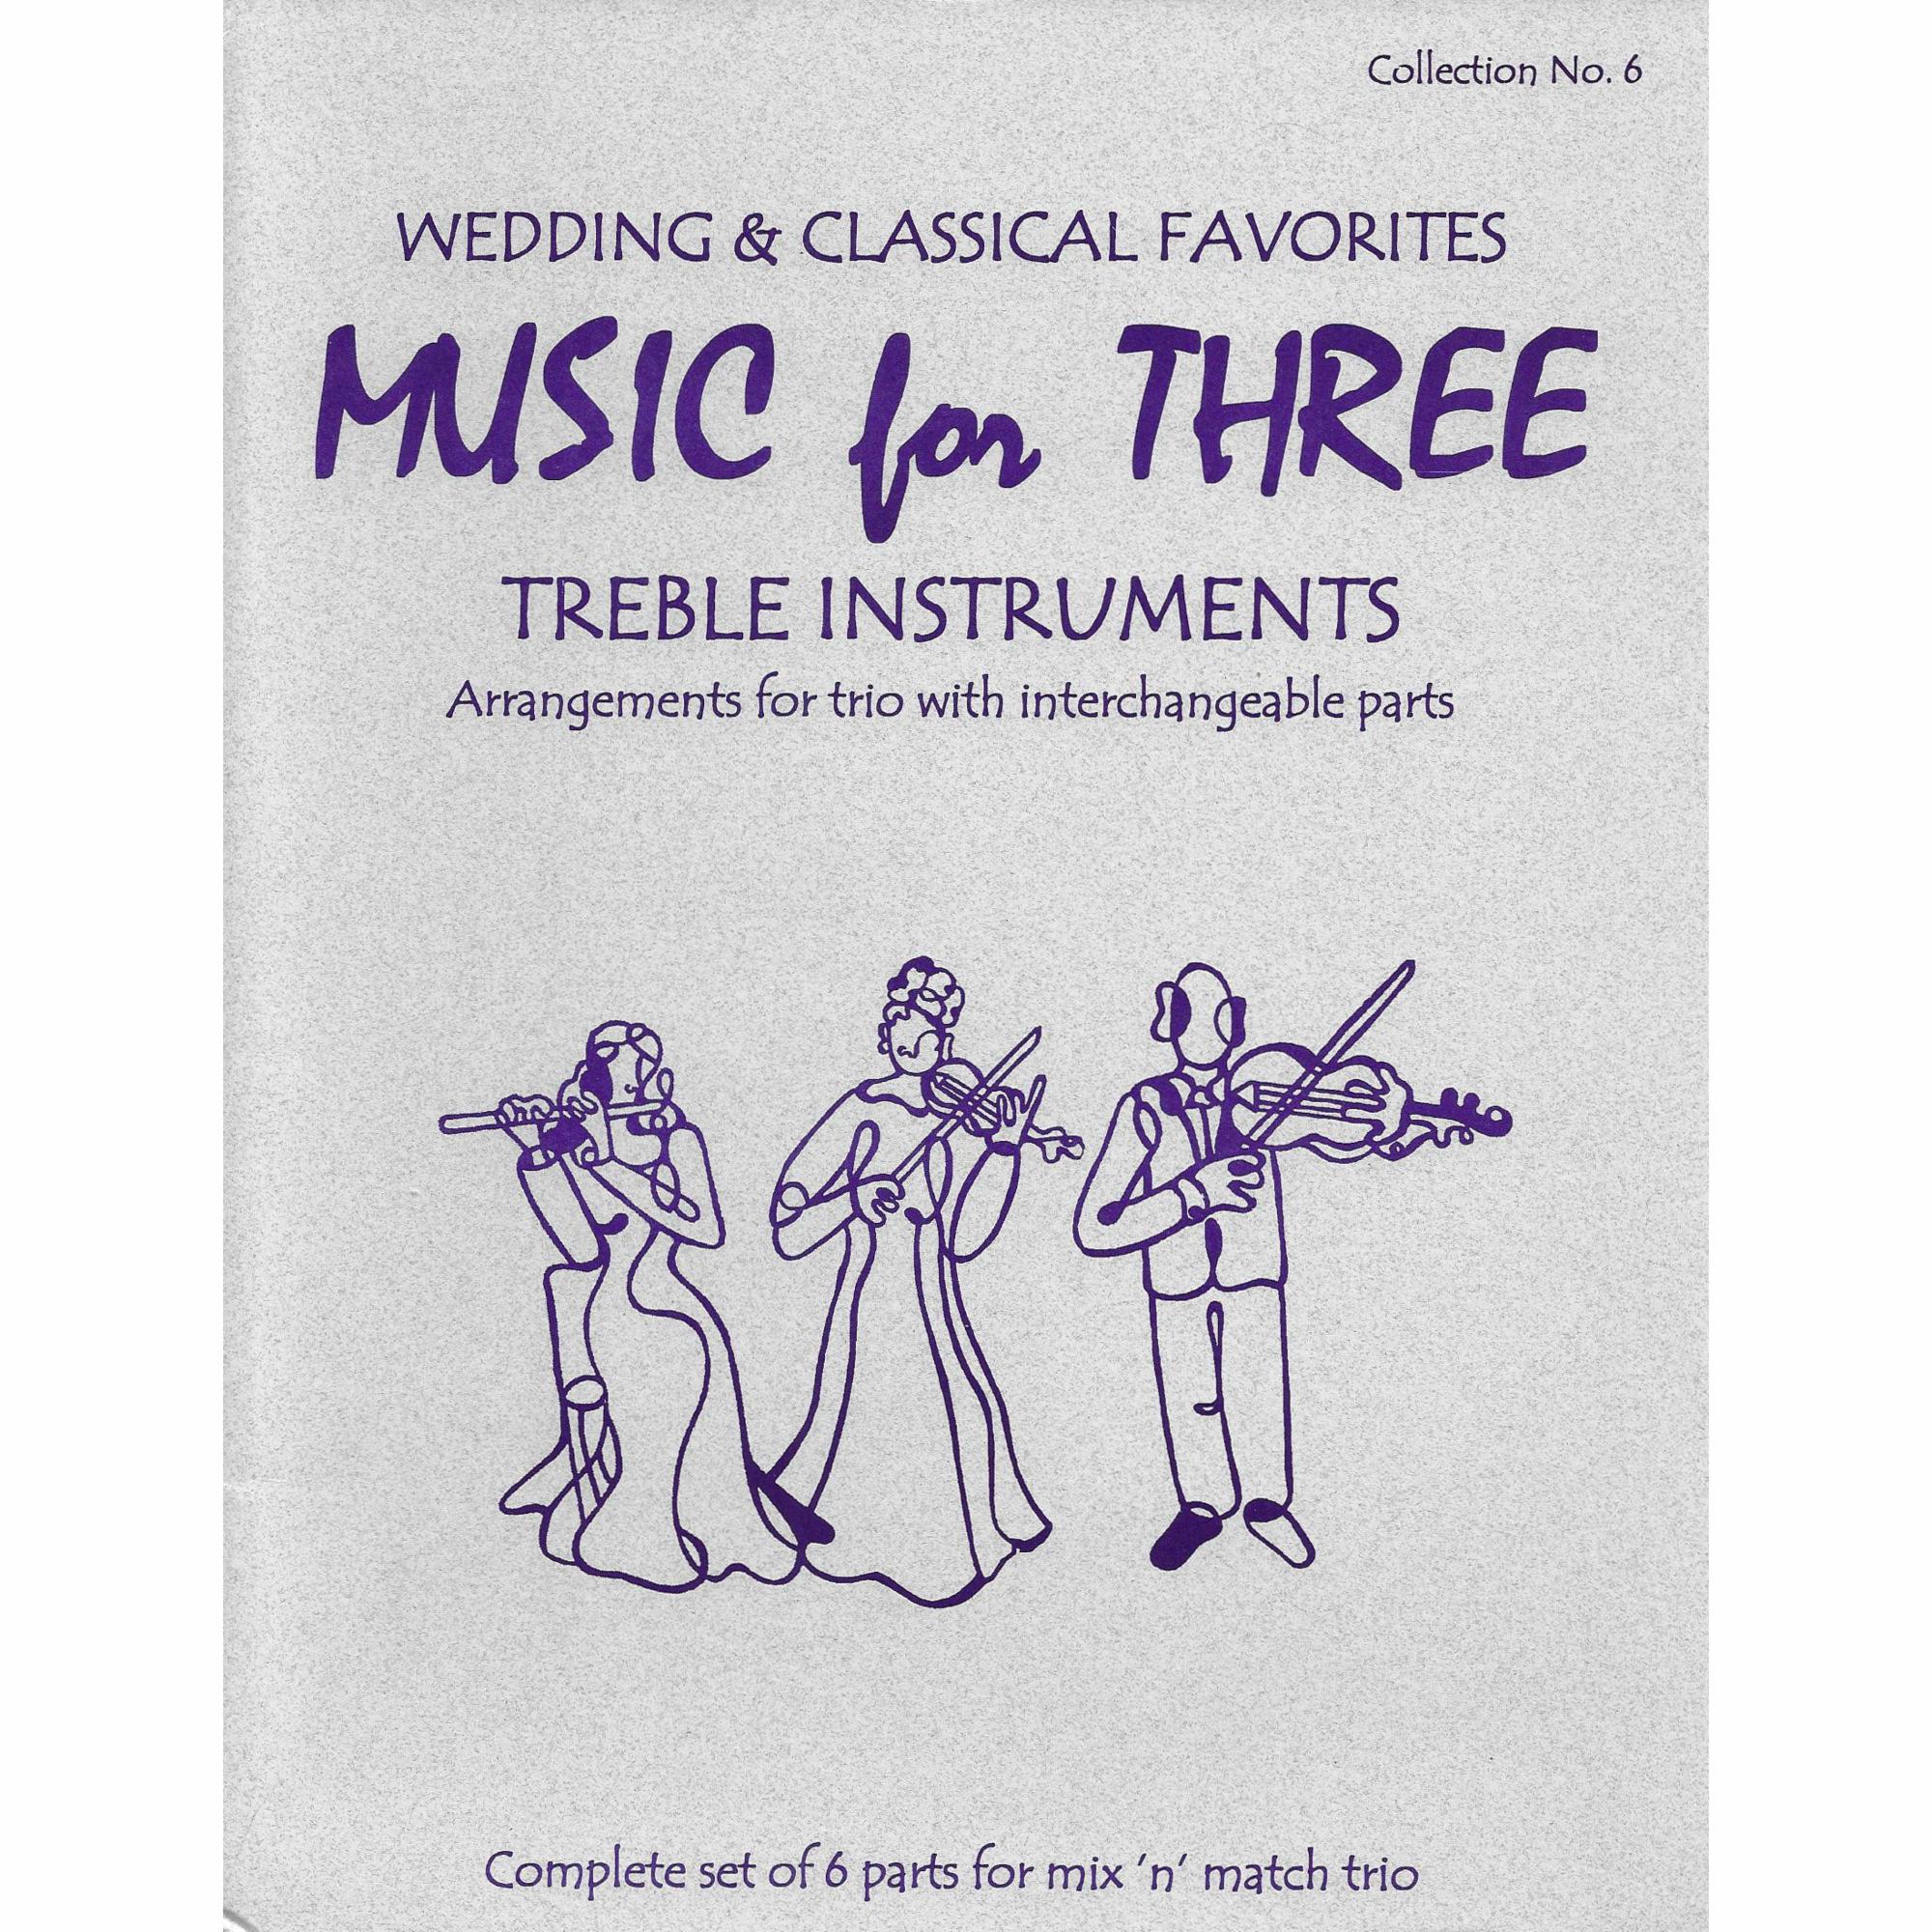 Music for Three Treble Instruments, Collection 6